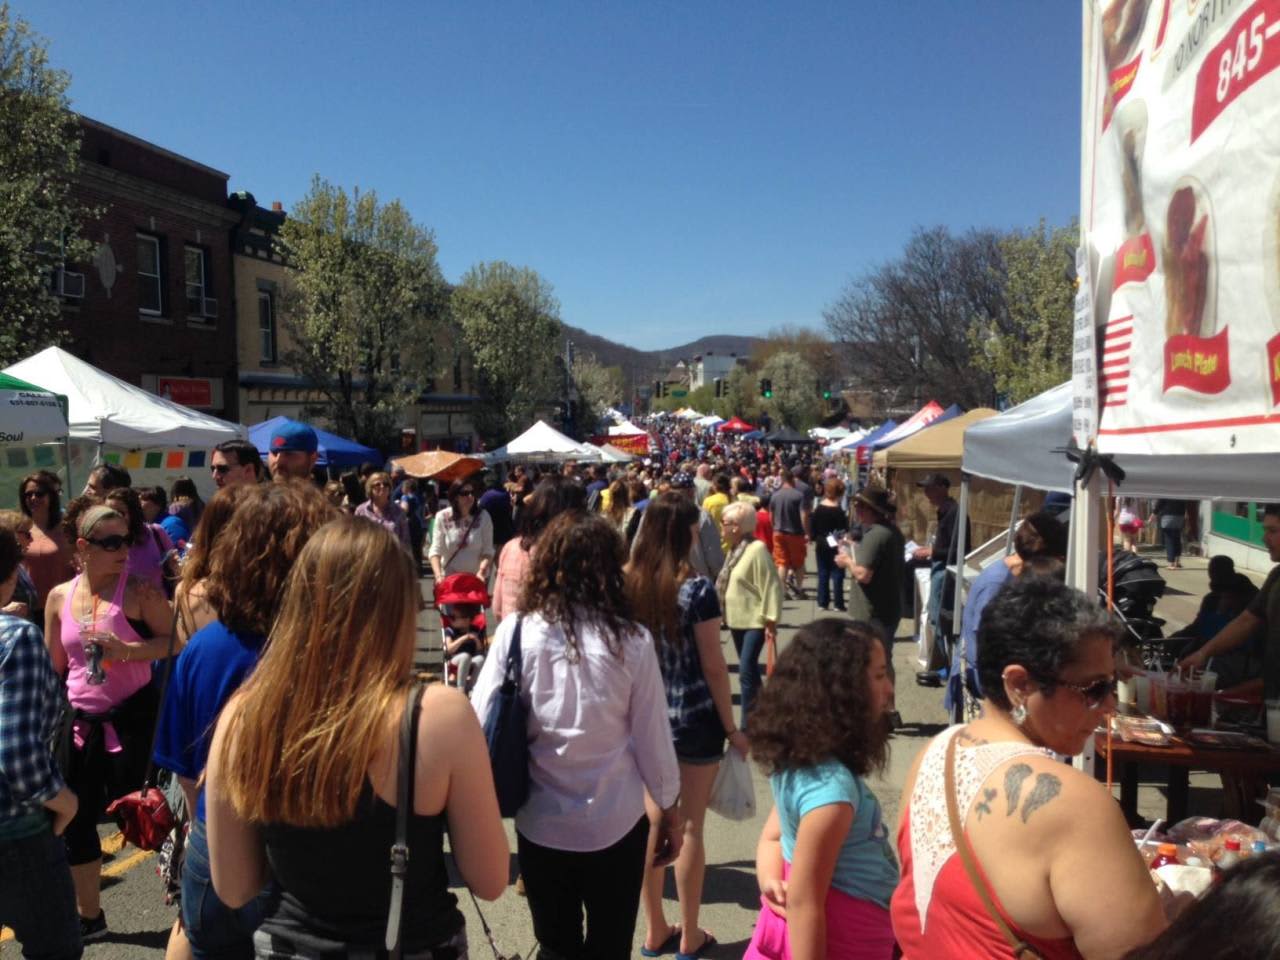 The crowds at the Suffern Street Fair were big enough to spur interest in having another fair in September.